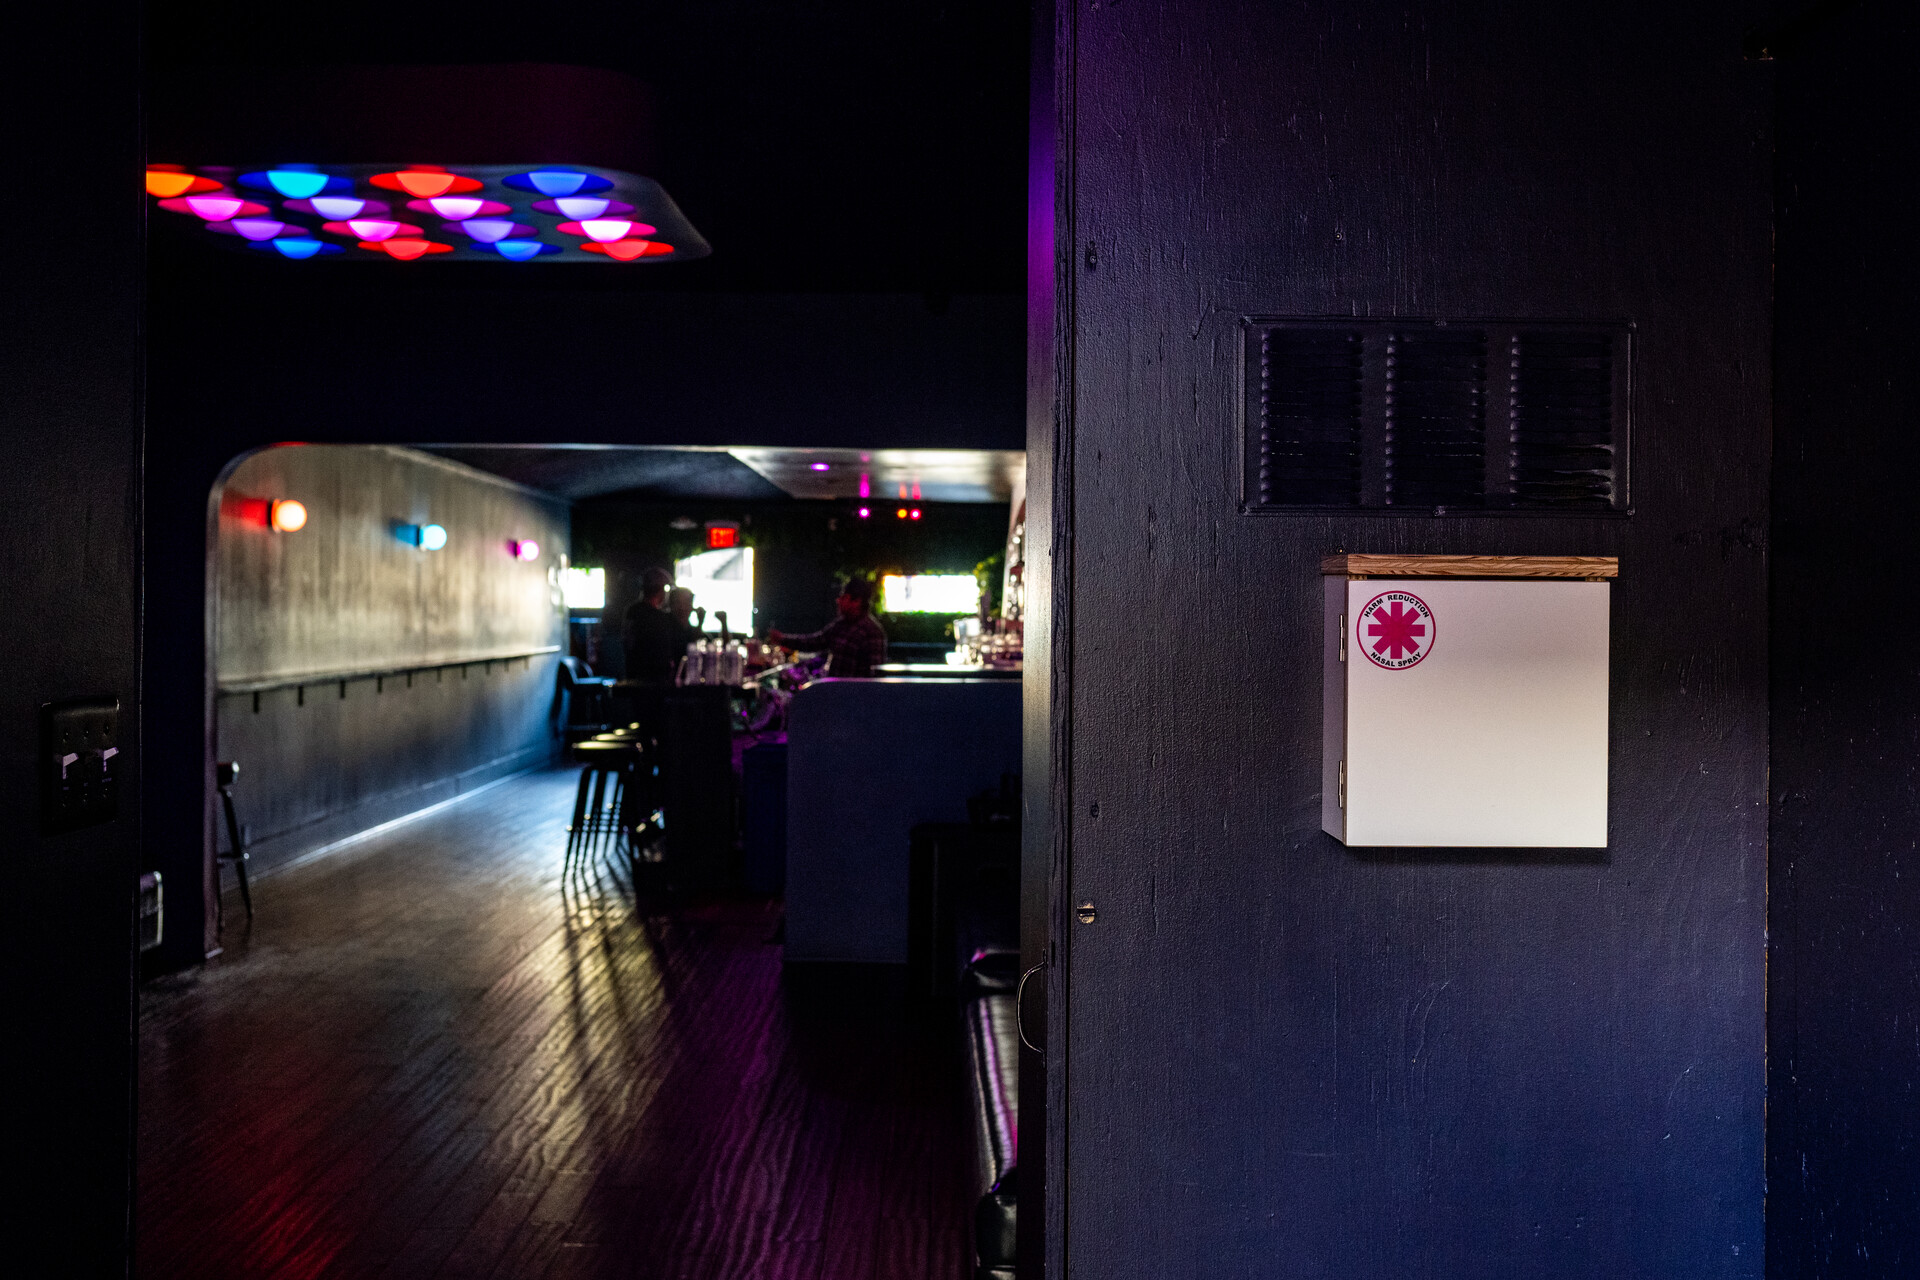 A closed white box with a pink asterisk logo hangs on a wall in a dimly lit bar with a bar counter further back and a bartender and two patrons.